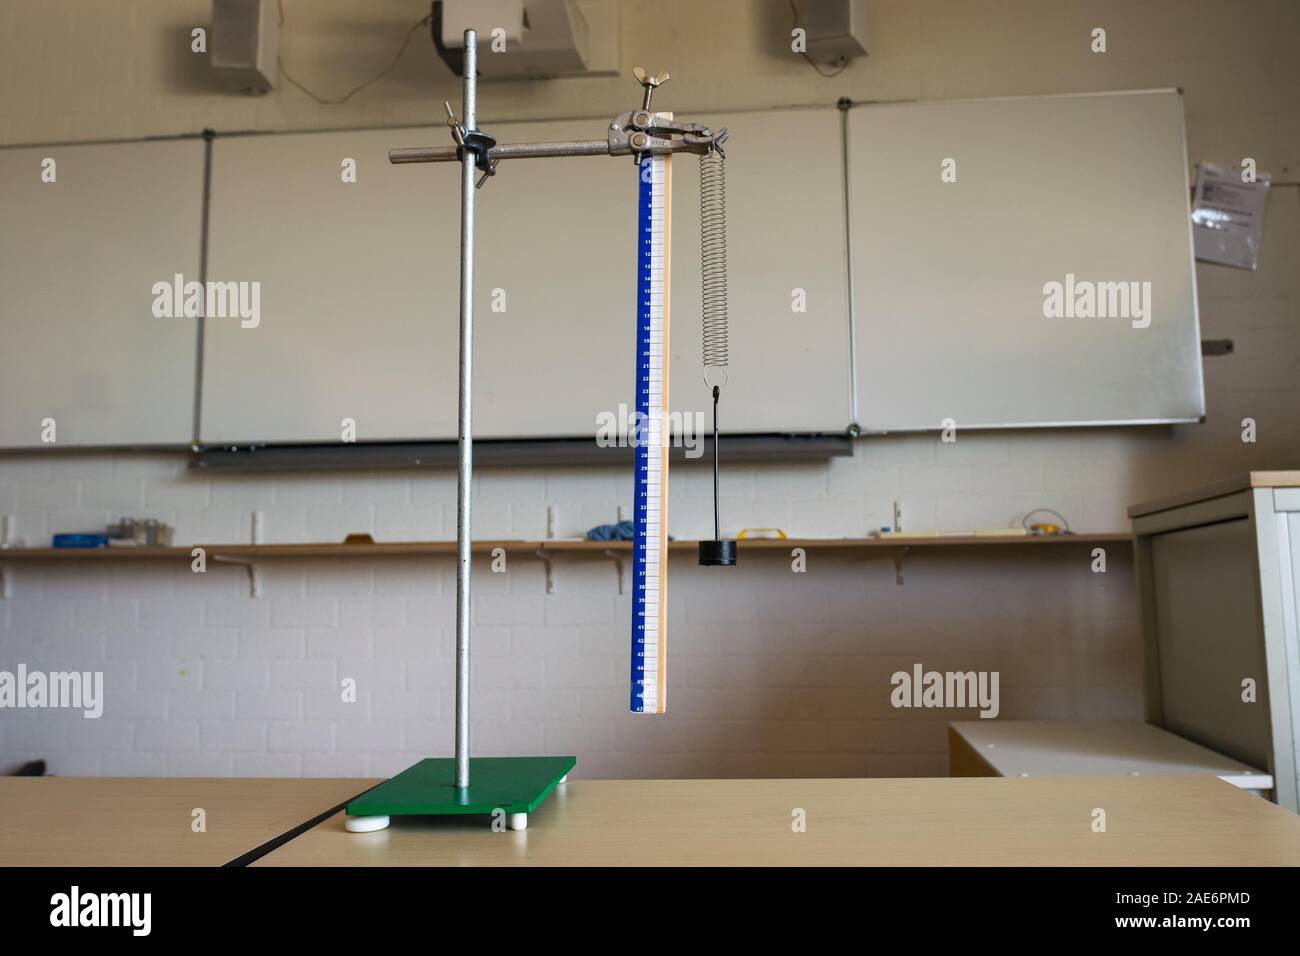 Experiment with mounting of a spring and weight. Demonstration of Hooke's law. Stock Photo